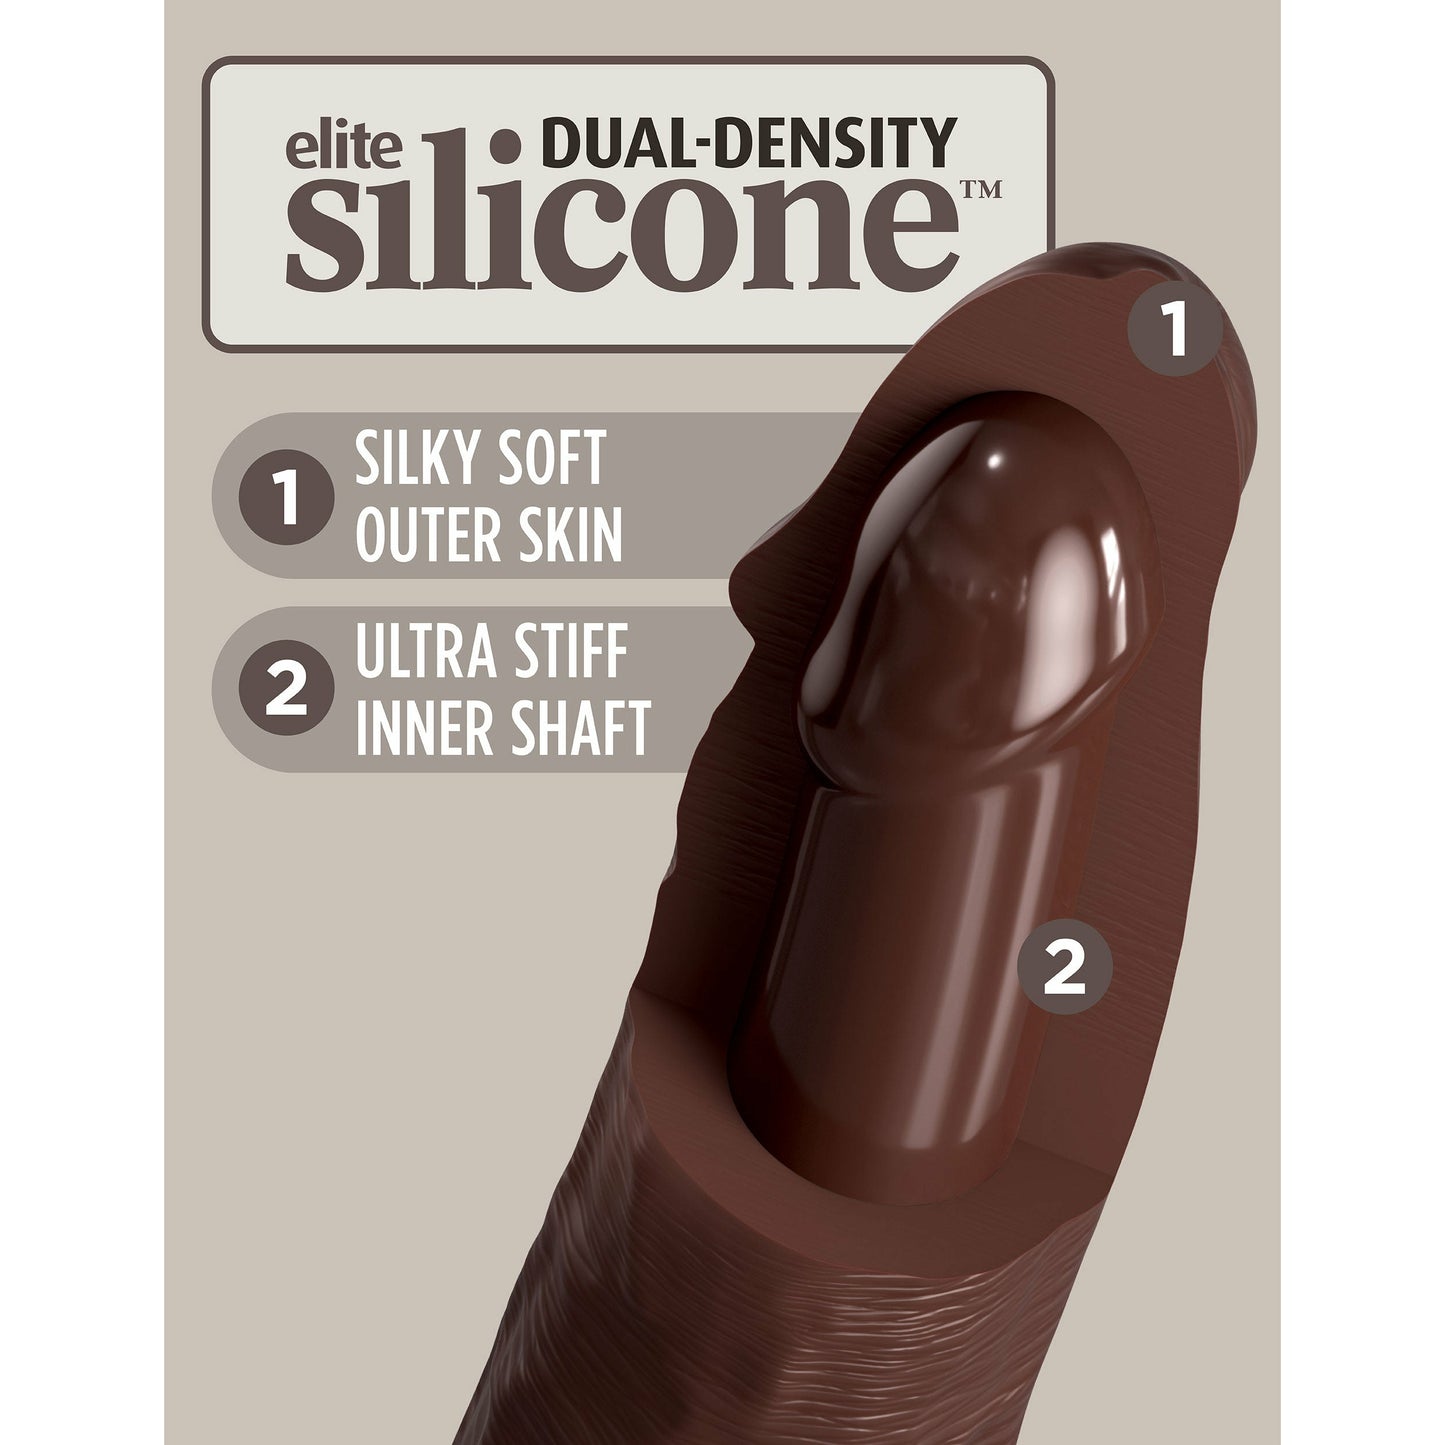 King Cock Elite 7 Inch Silicone Dual Density Cock  - Brown